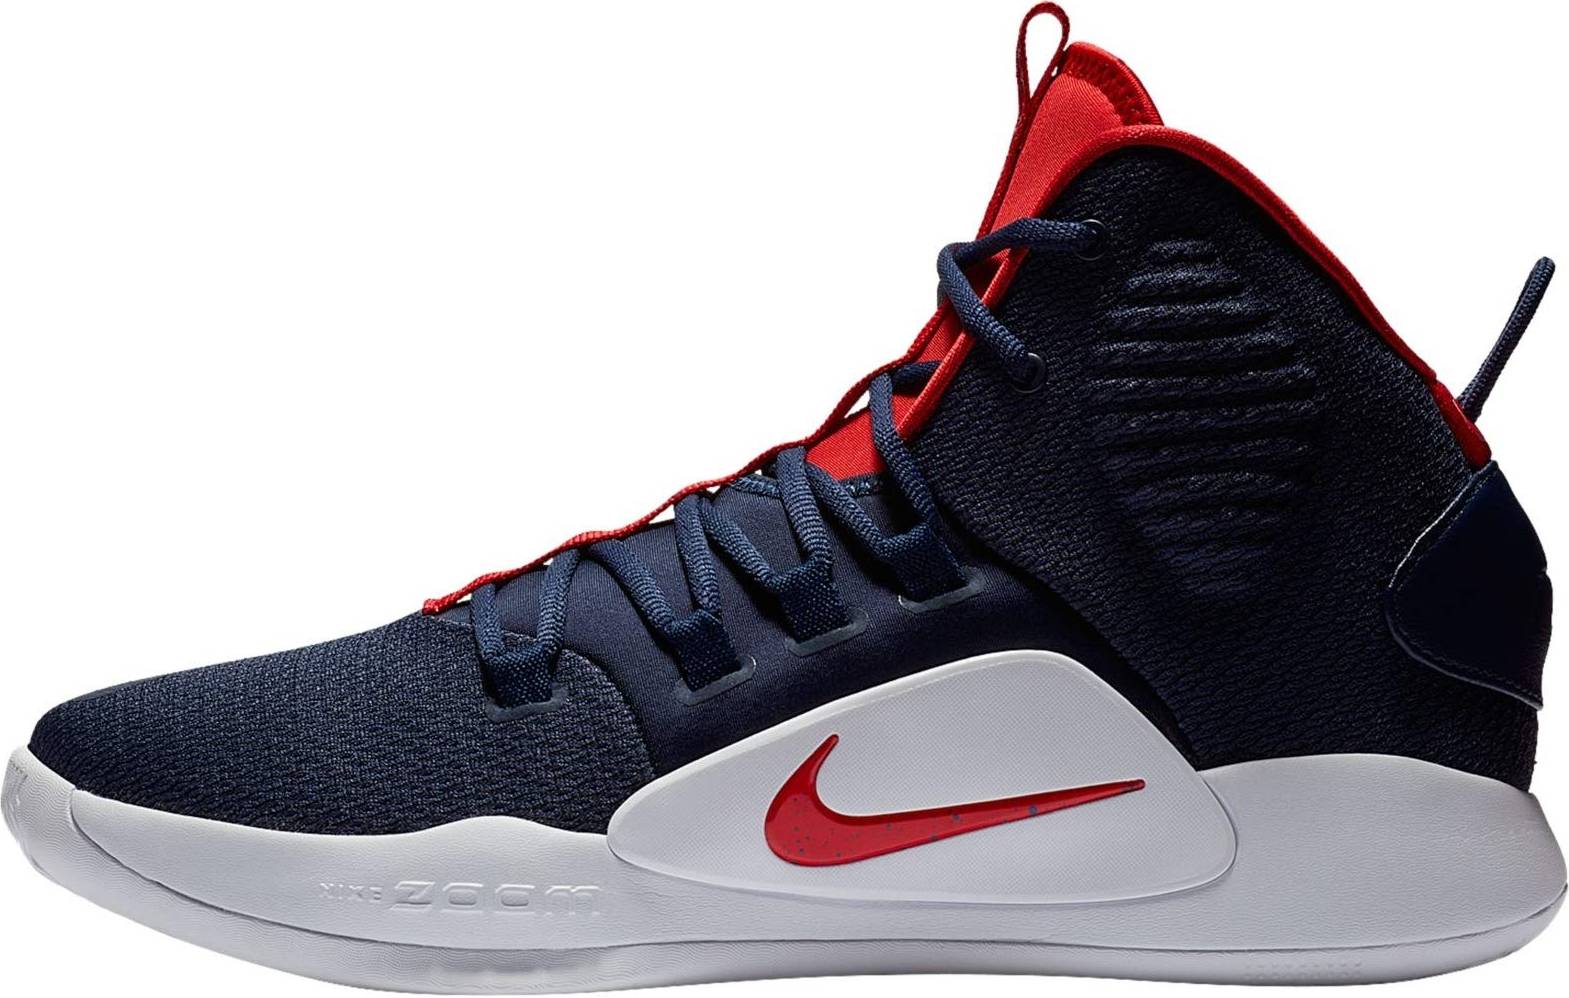 Only £125 + Review of Nike Hyperdunk X 